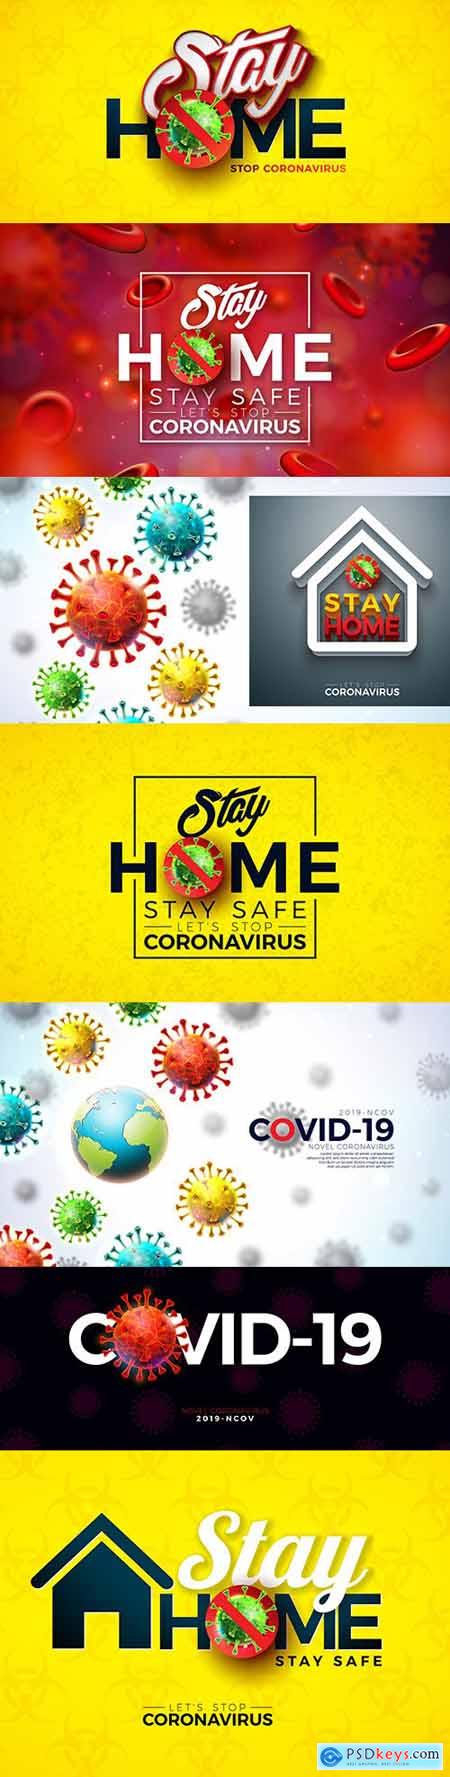 Stay home Covid-19 coronavirus and viral cell outbreak design